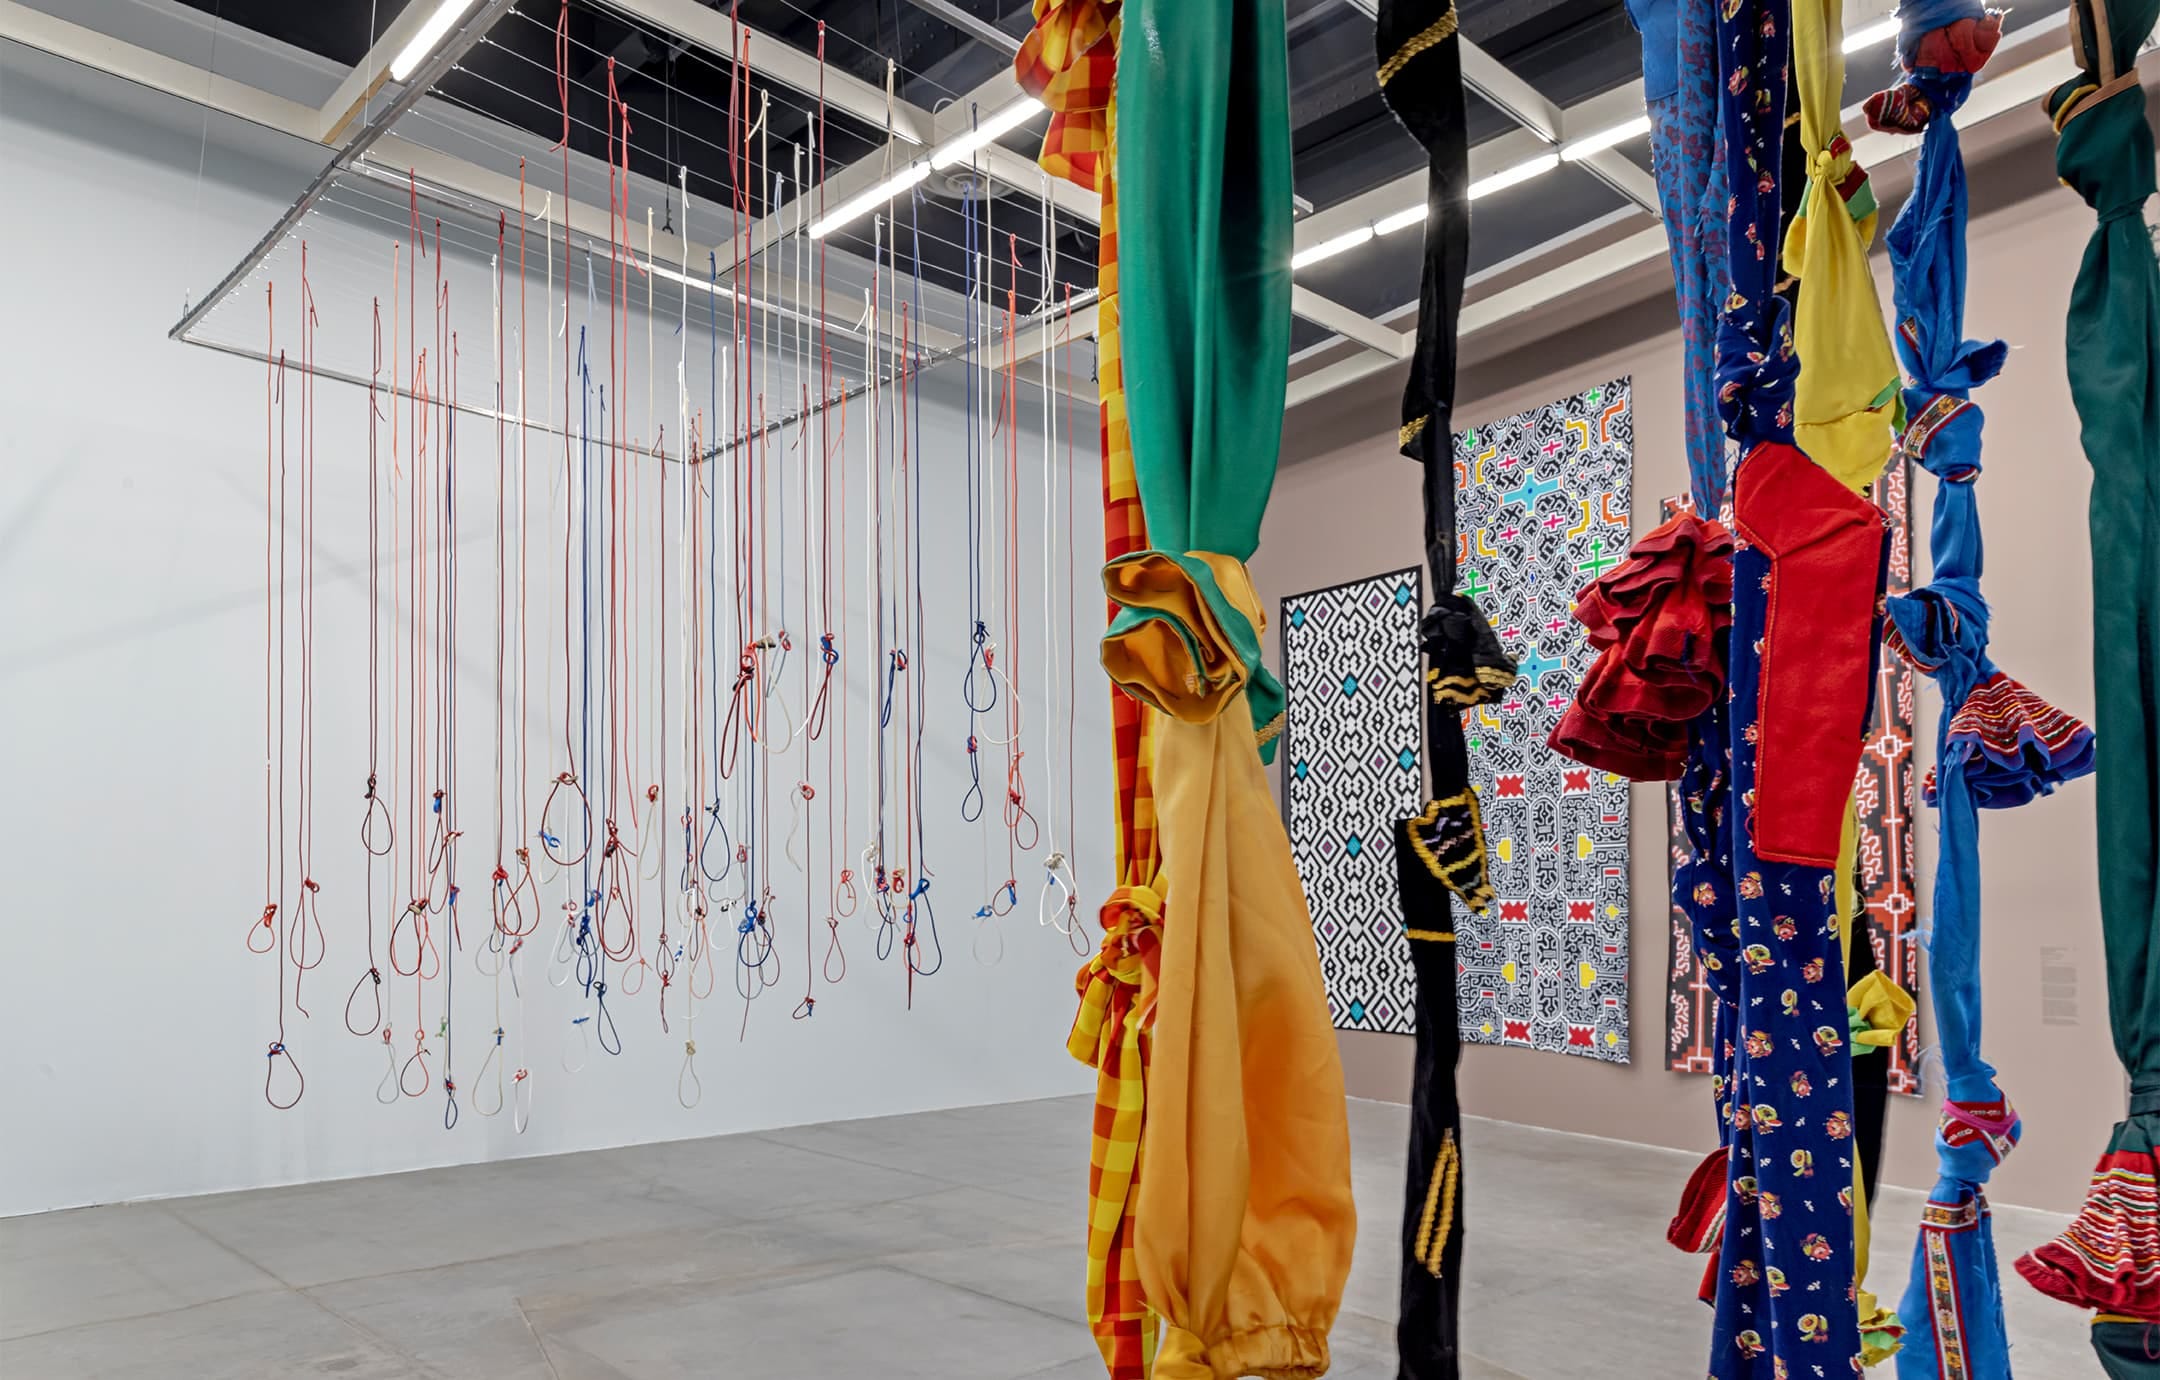 Photograph of a tall art gallery with two artworks suspended from the ceiling, one of which is a composition of multicolored textiles knotted together and hanging in long strands, the other of which appears to be colored ropes with looped shapes at the bottom. In the background, through the two foreground works, we can see three large hanging paintings with graphic motifs in black and white with spots of color.